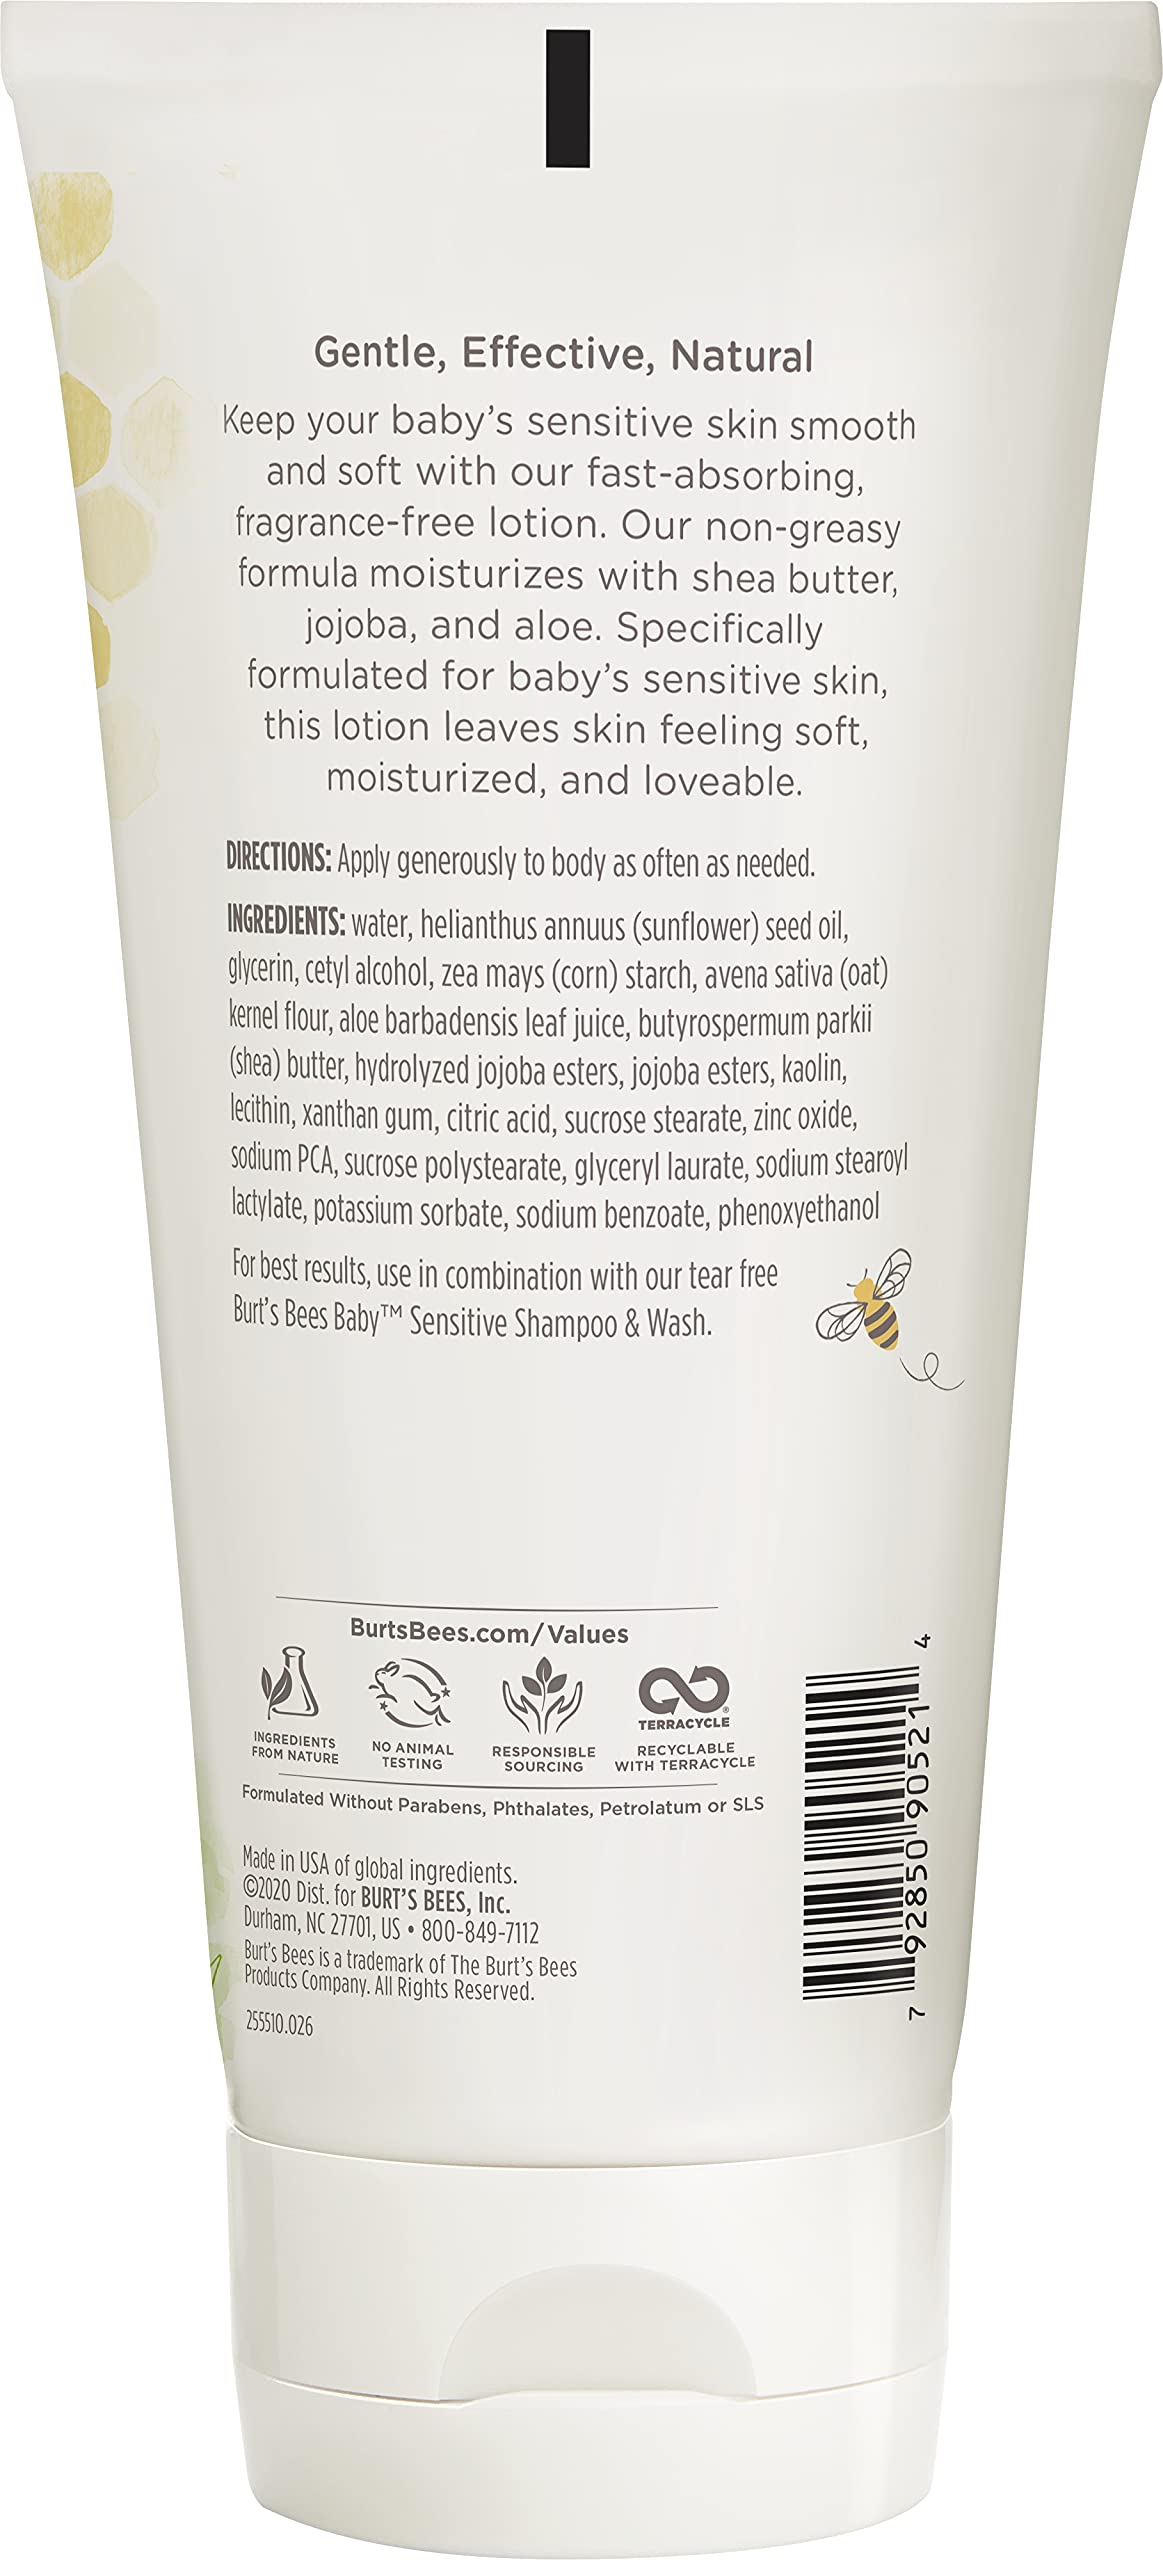 Burt's Bees Baby Ultra Gentle Lotion for Sensitive Skin - 6 Ounces - Pack of 3